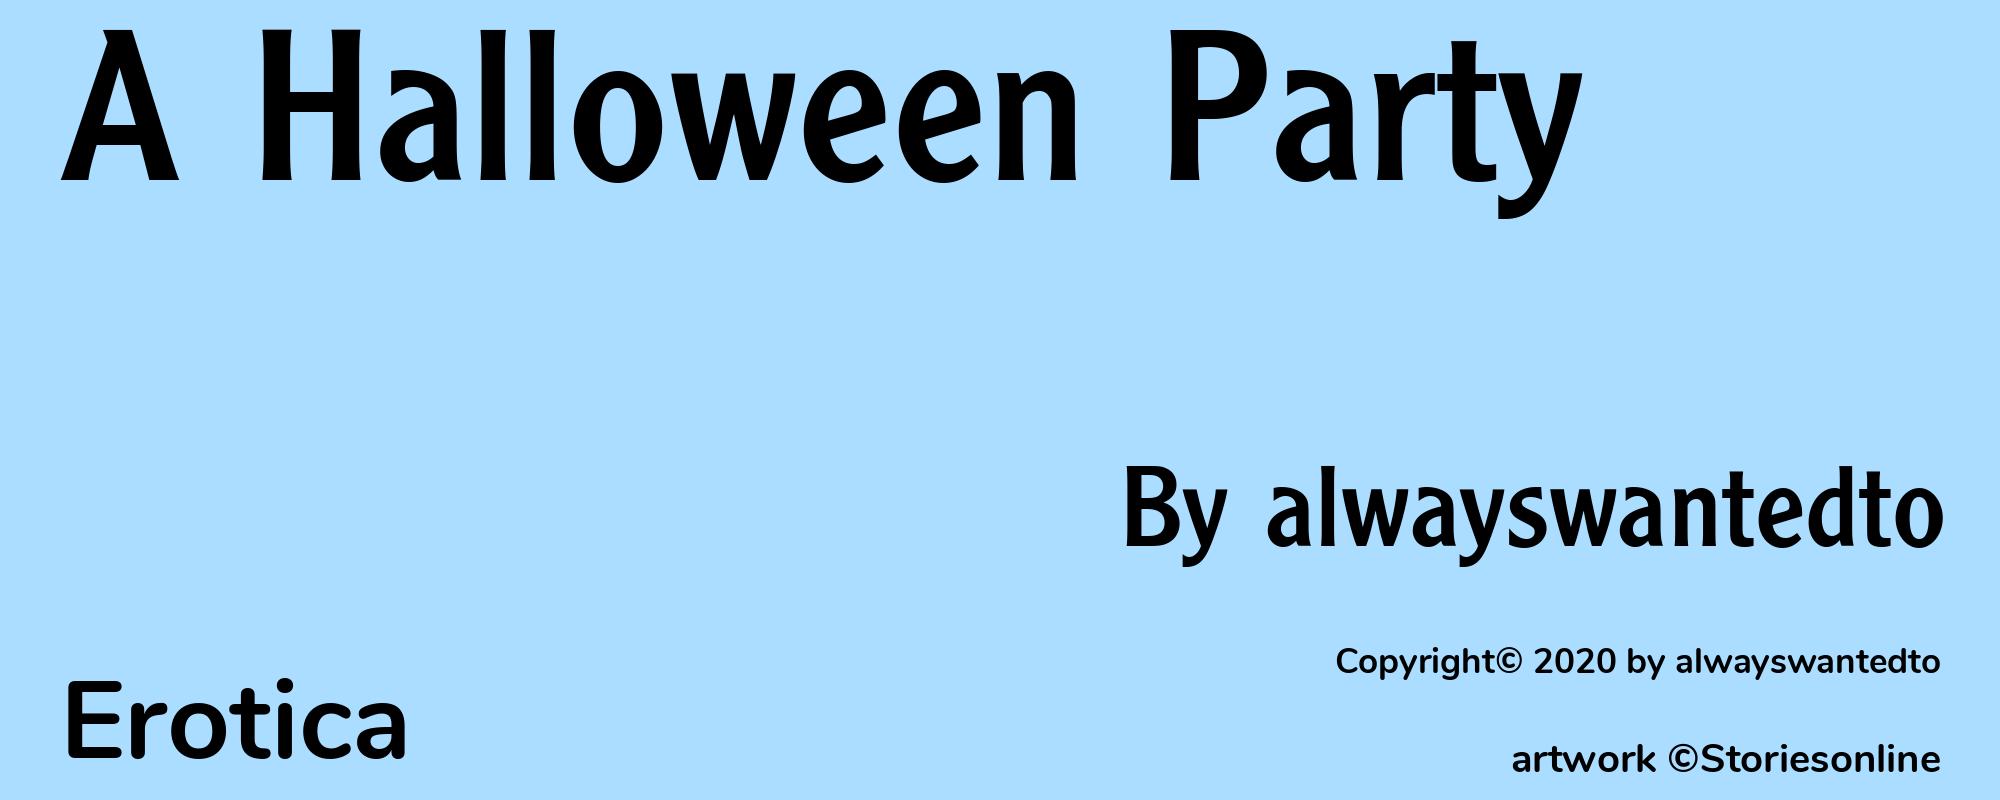 A Halloween Party - Cover